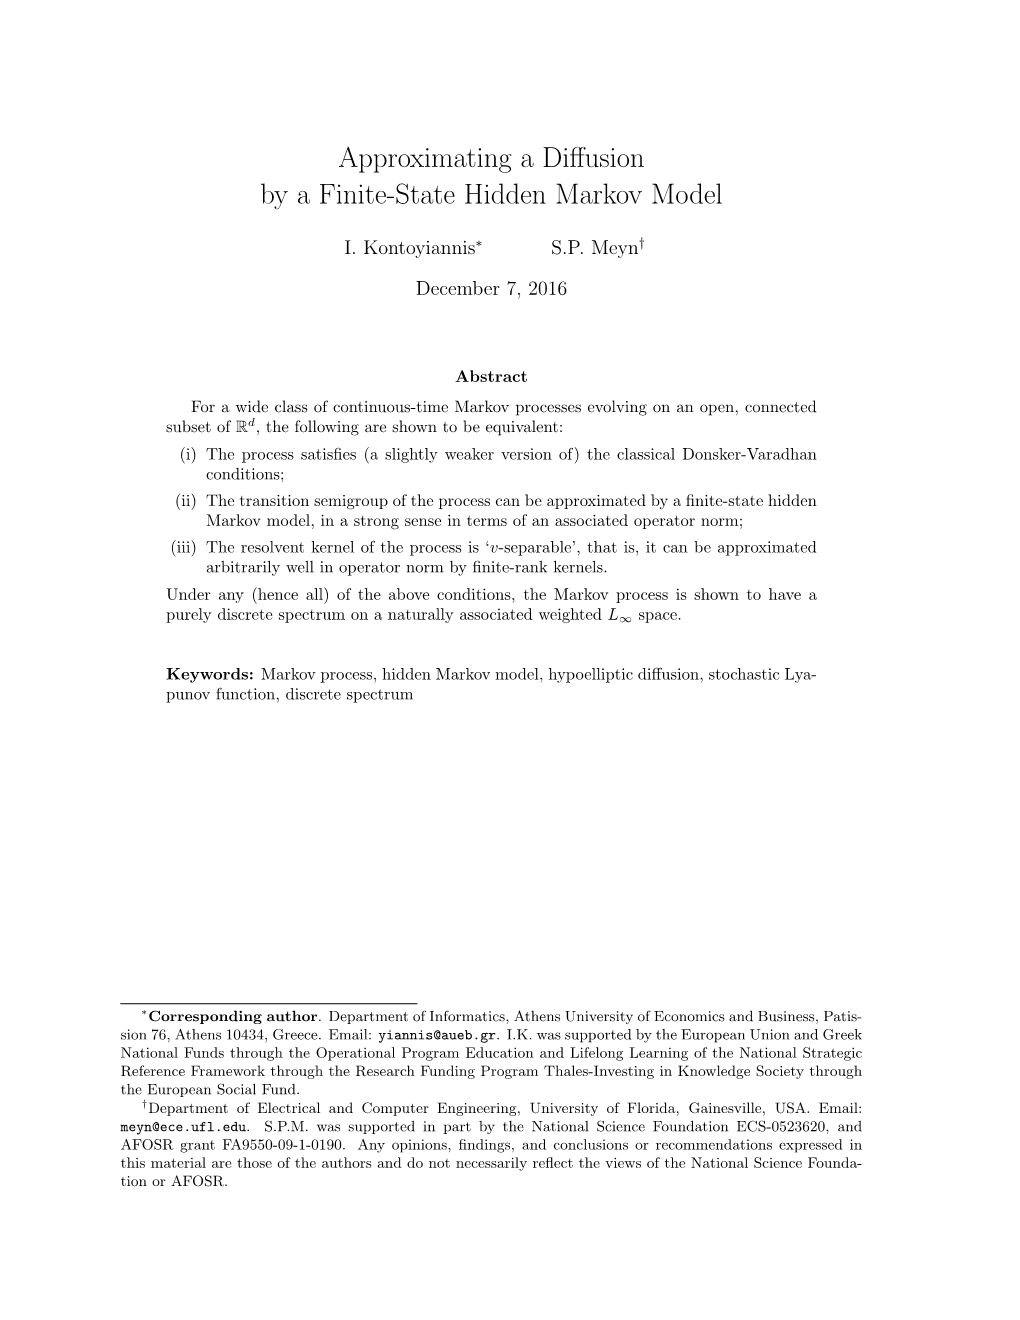 Approximating a Diffusion by a Finite-State Hidden Markov Model